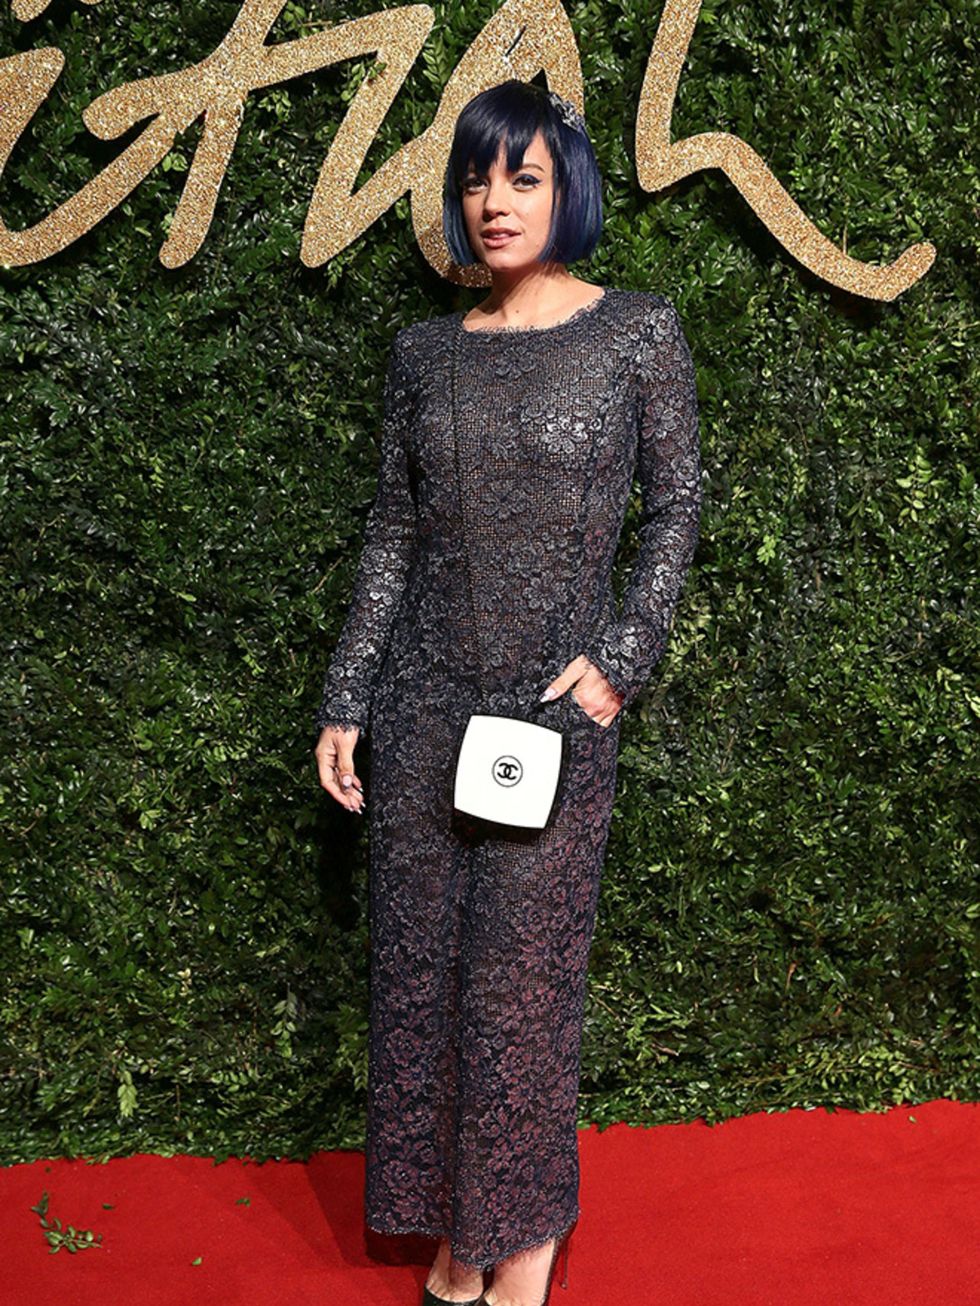 Lily Allen attends the British Fashion Awards in London, November 2015.